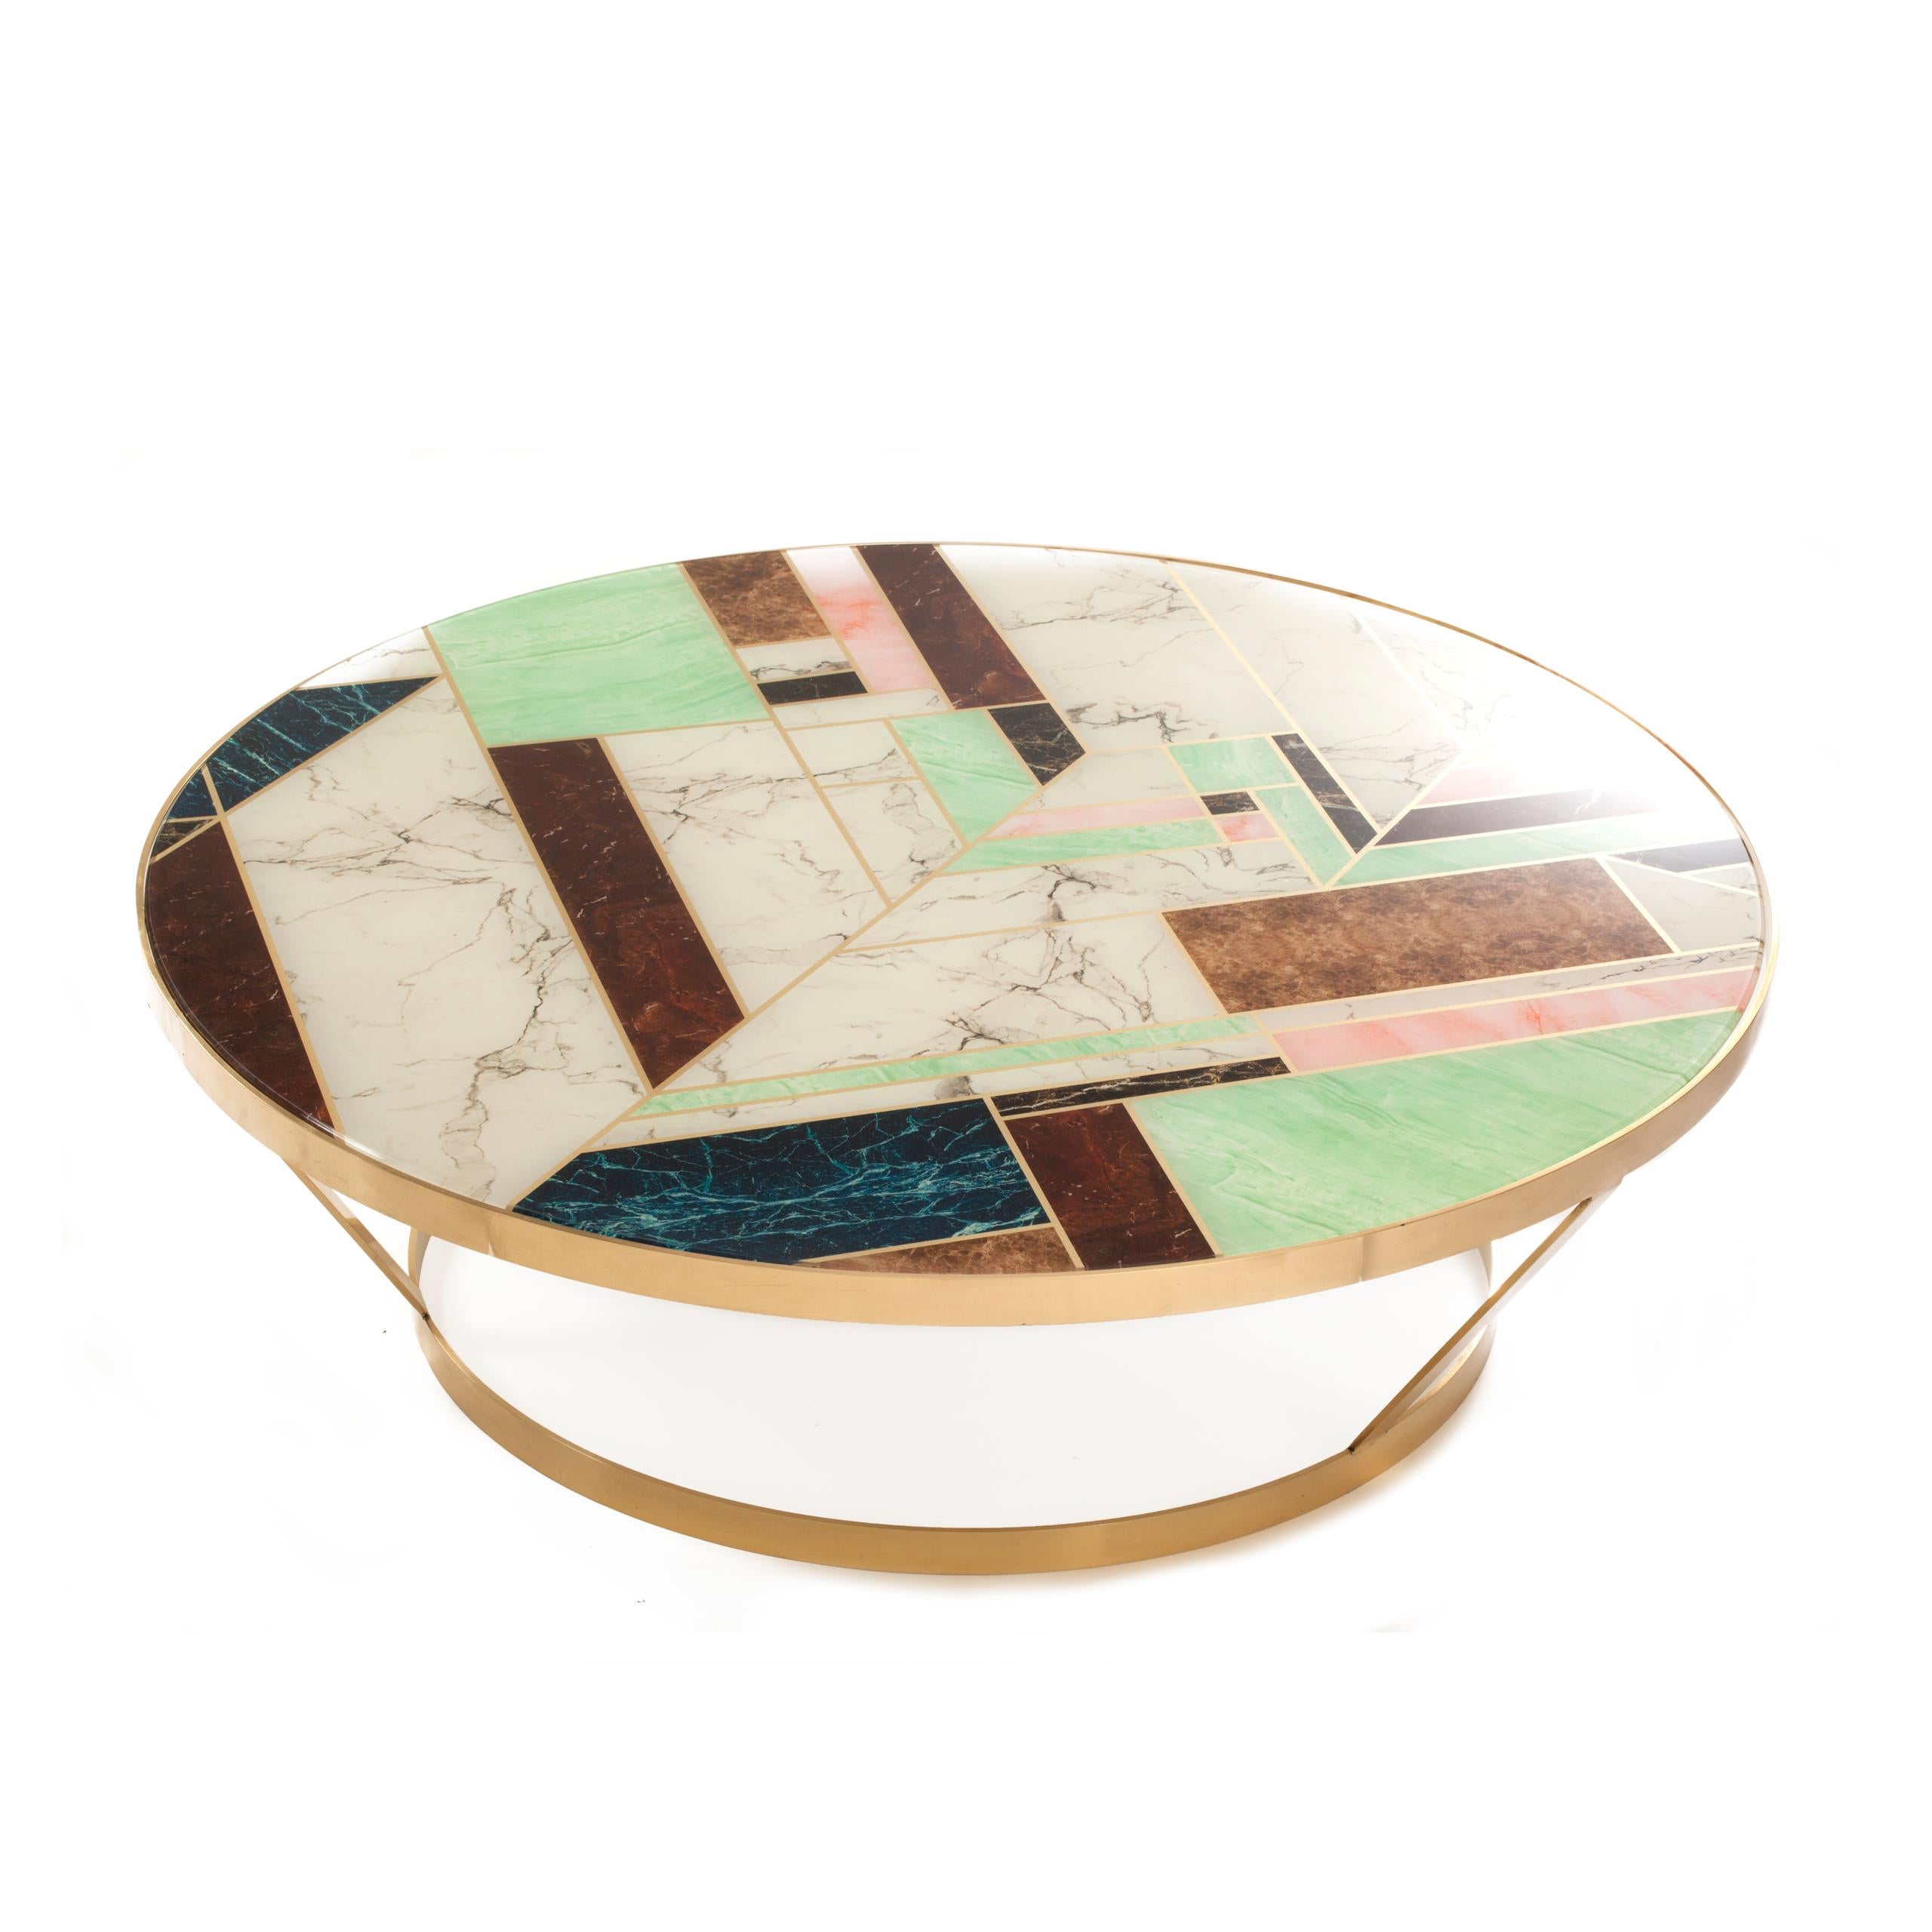 York brings a modern twist to traditional marble. A round top with bold, geometric pattern sits on a polished brass structure, making York a truly unique piece. Made to Order.
